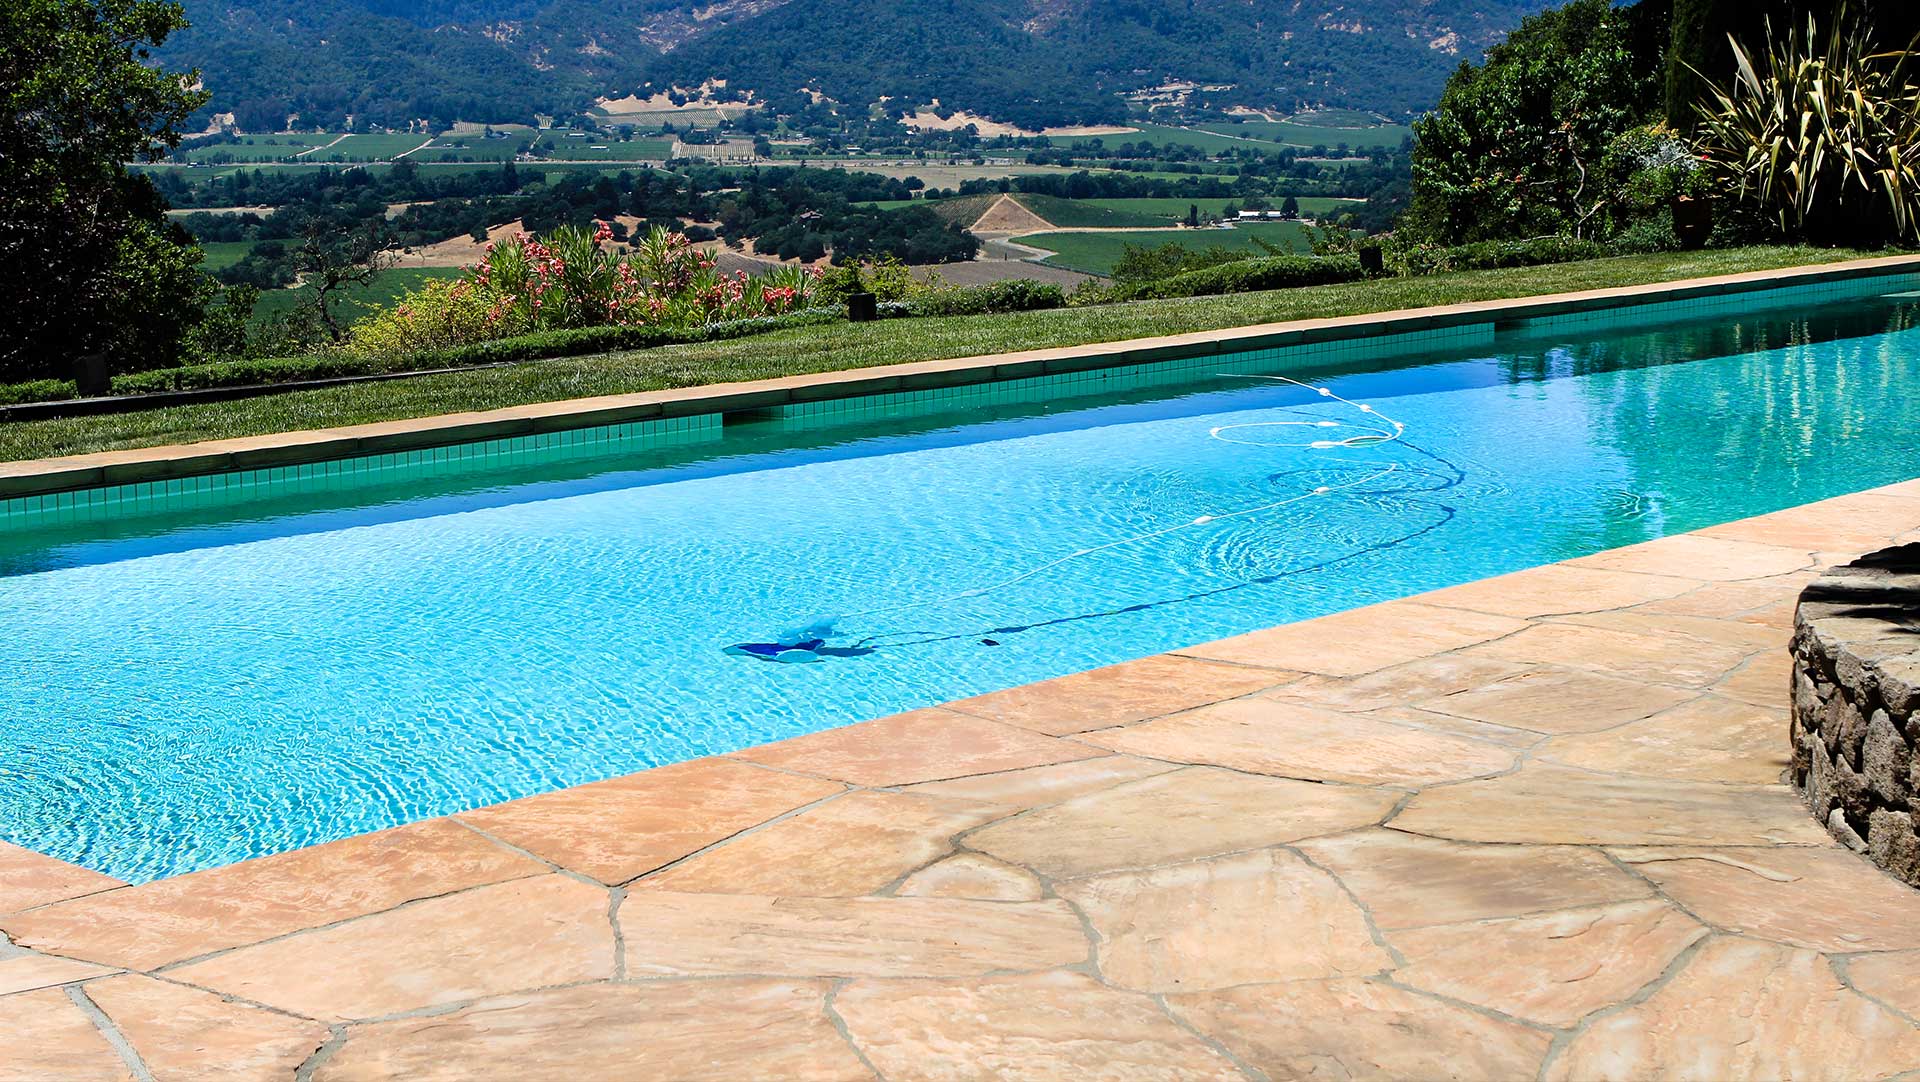 About Napa Pool Service Spa Repairs And Pool Maintenance